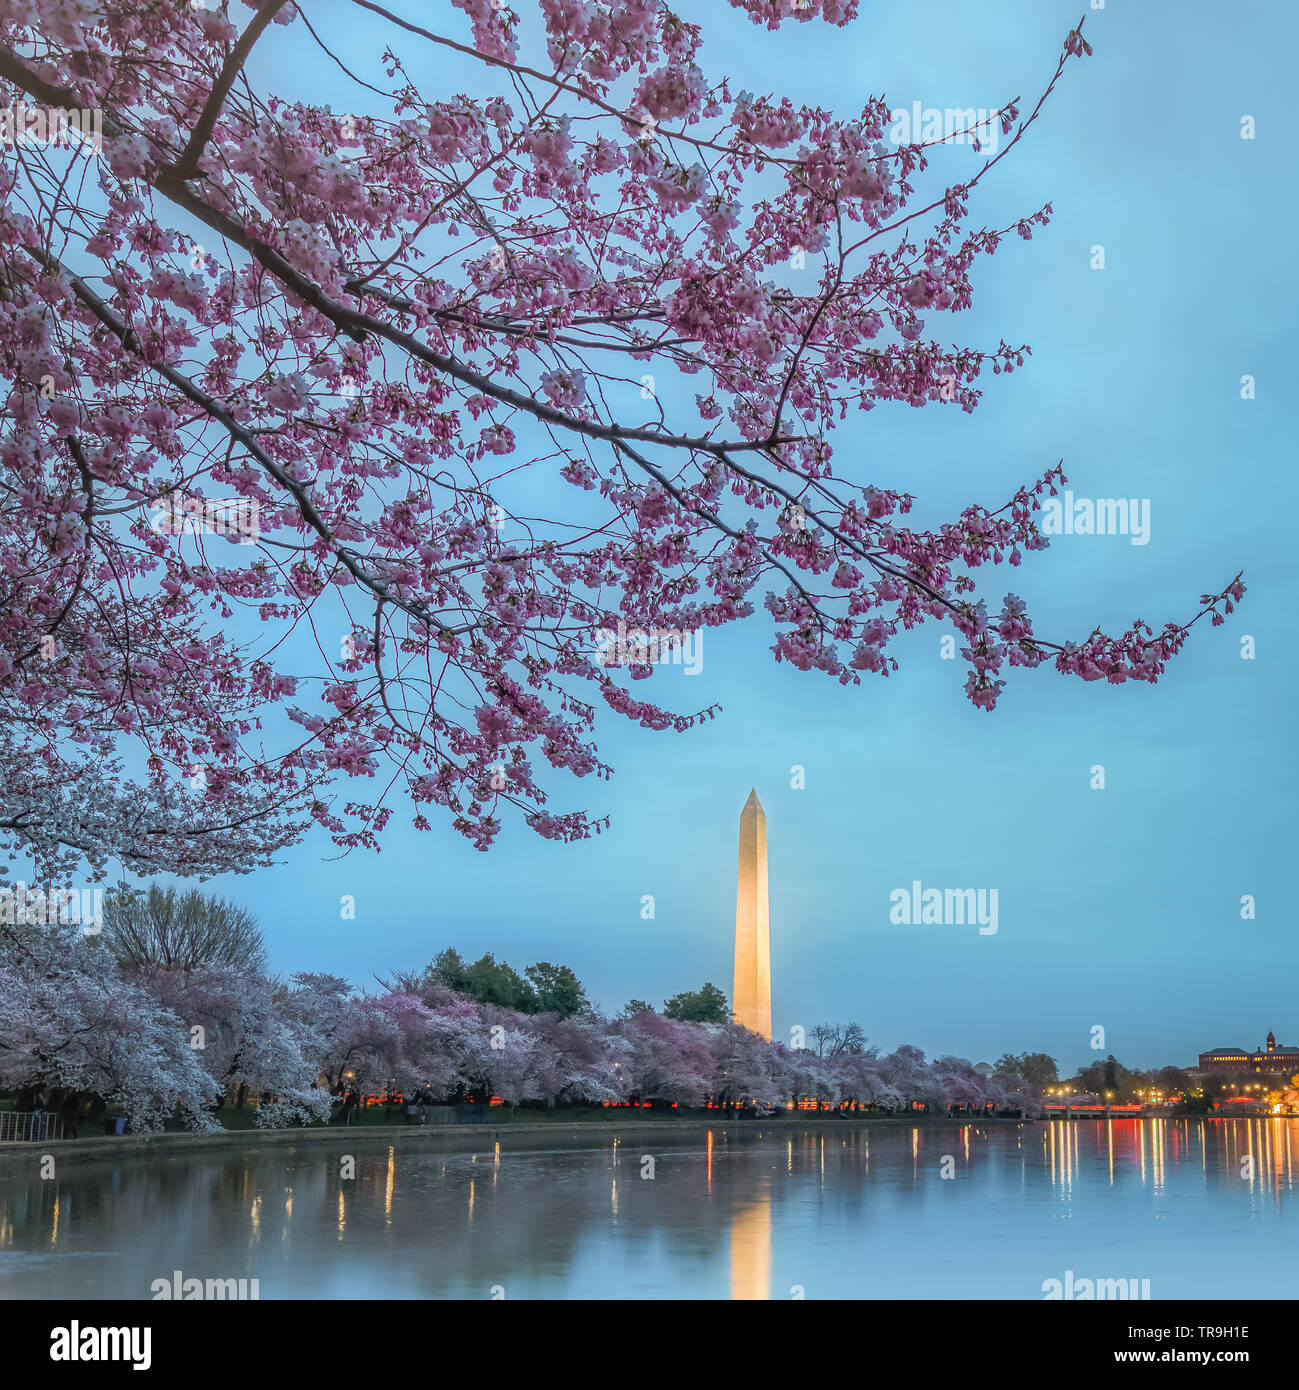 Washington Monument framed by cherry blossoms and reflected in the tidal basin at night in Washington, DC USA. Stock Photo